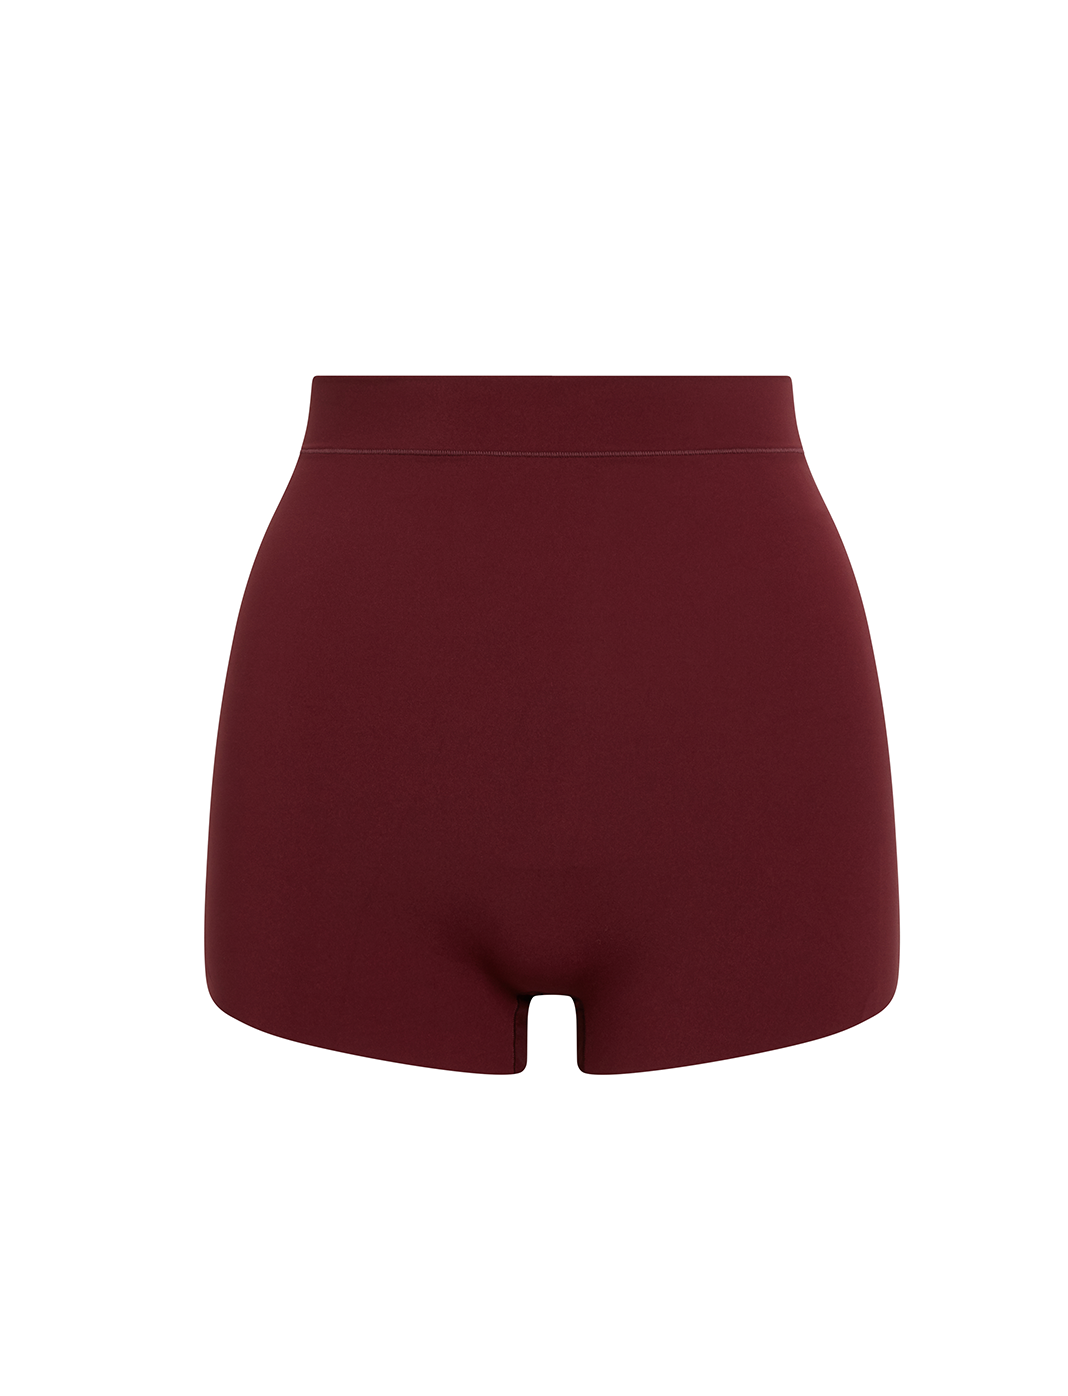 Buy Fashiol Women's Cotton Boyshorts (Pack of 3)  (SHORTY_SOLID_8_Assorted_M) at